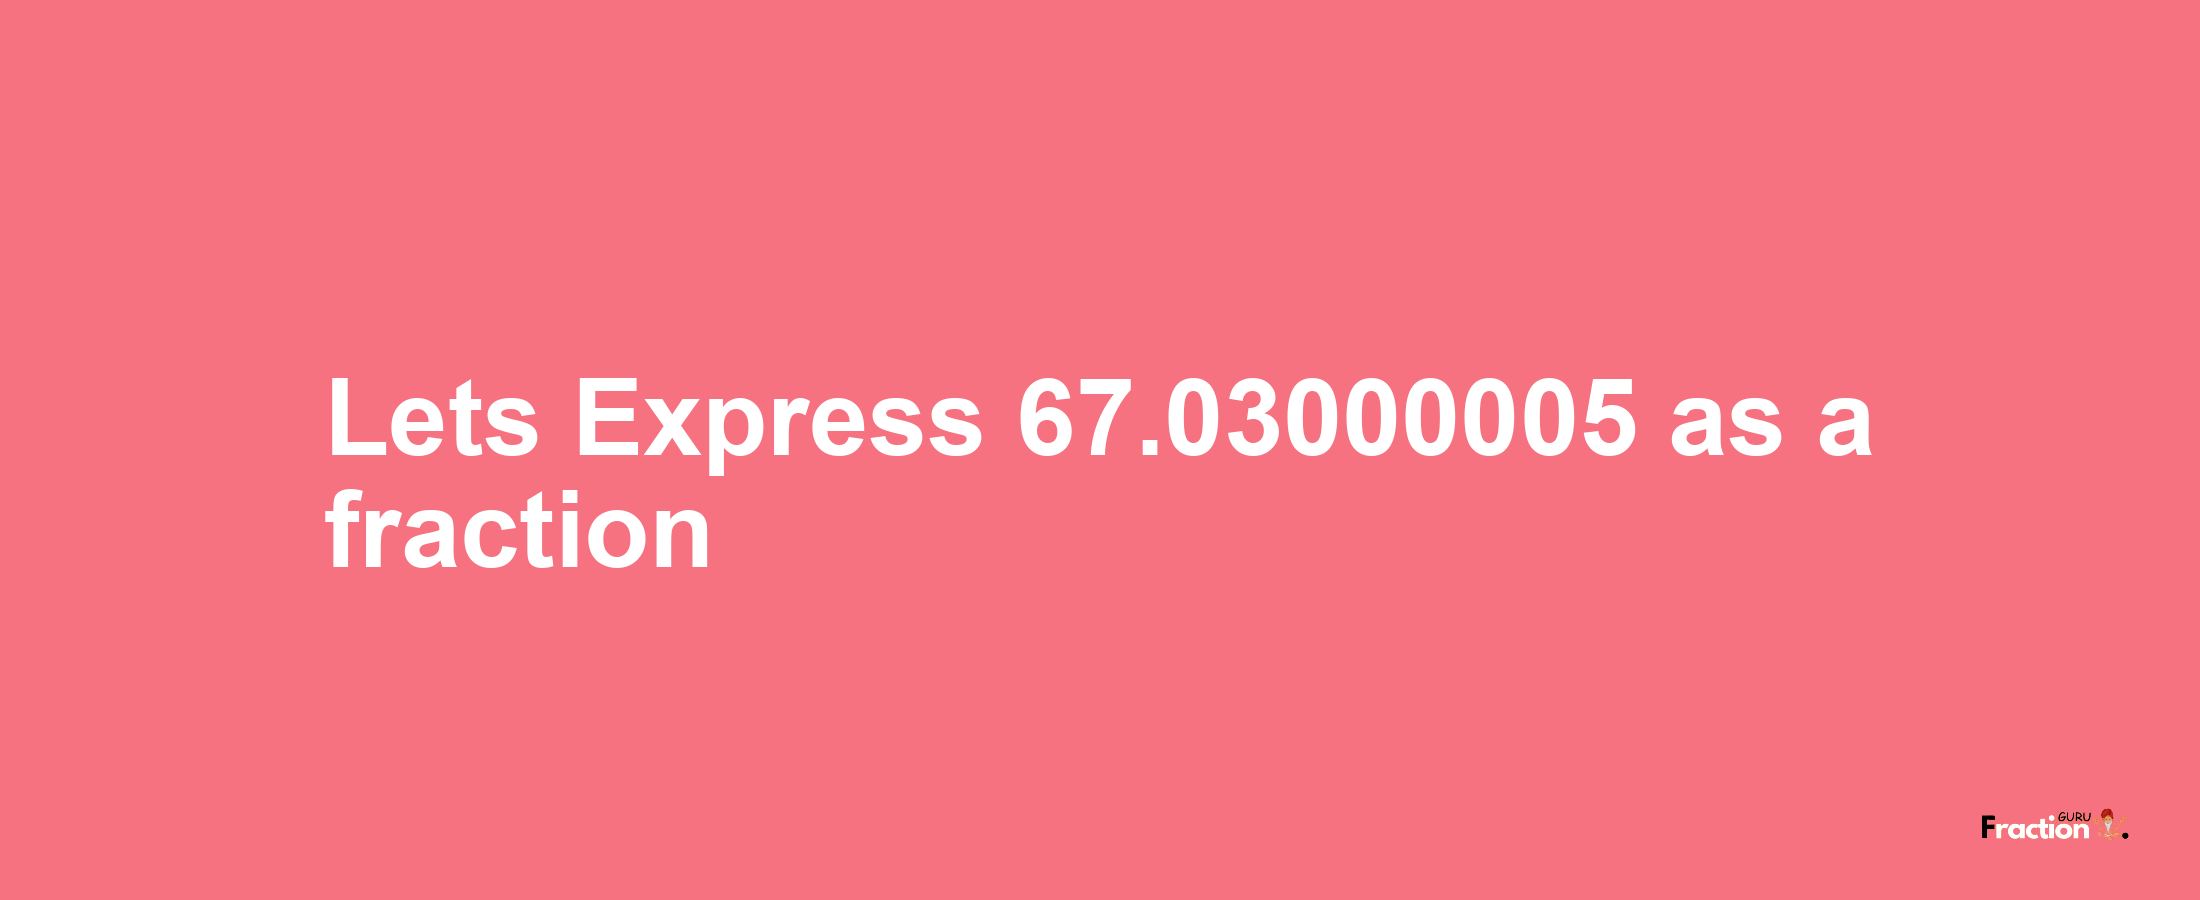 Lets Express 67.03000005 as afraction